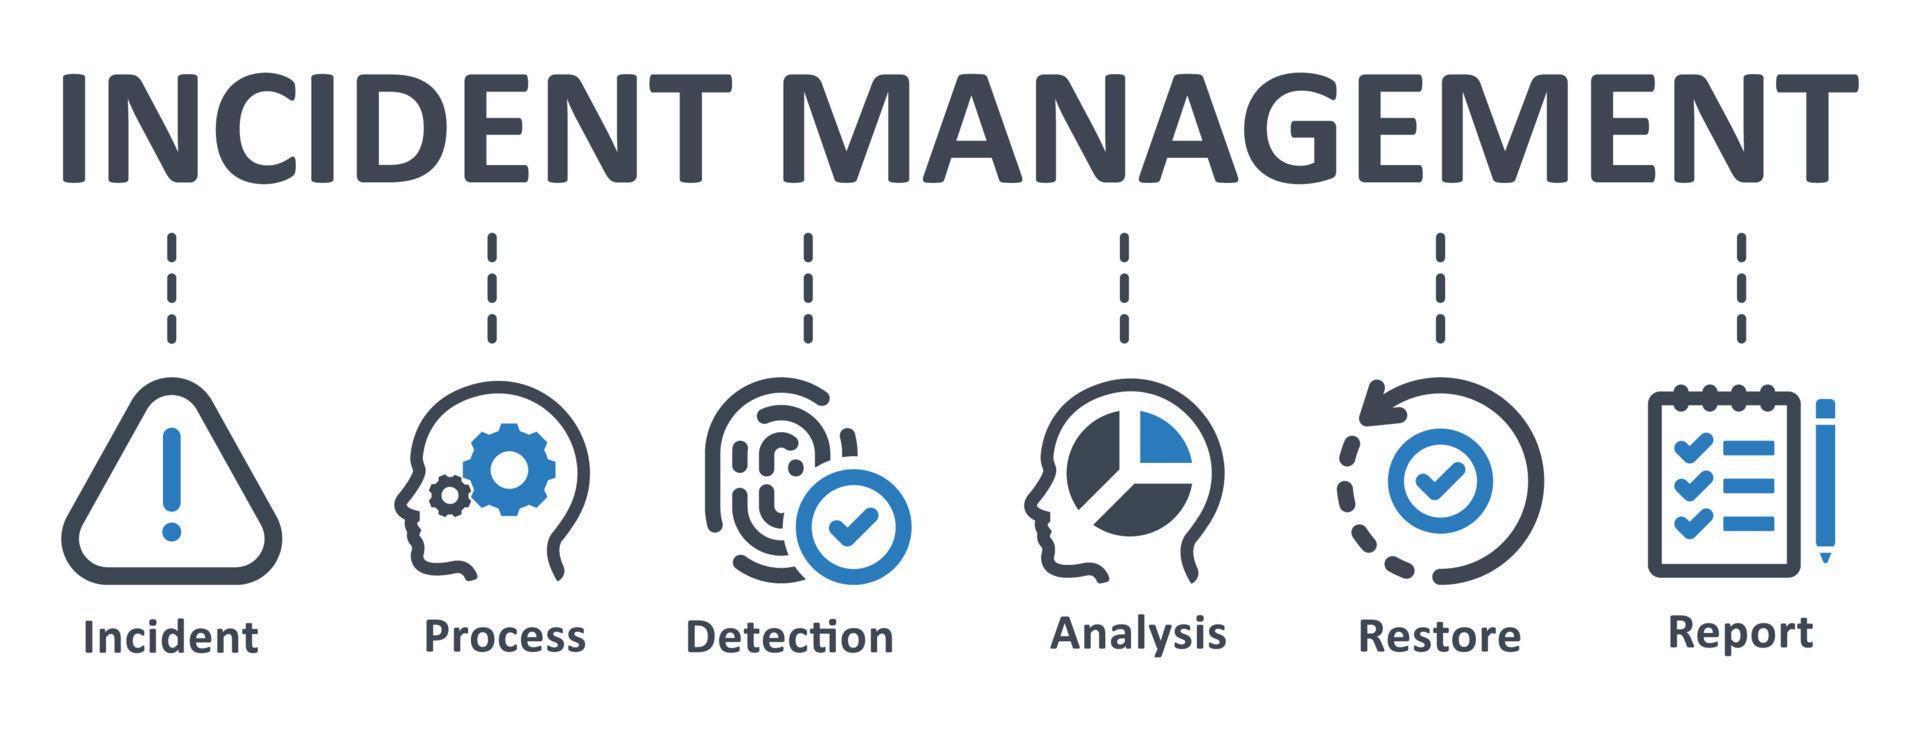 Incident Management icon - vector illustration . Incident, management, process, detection, analysis, restore, report , infographic, template, concept, banner, pictogram, icon set, icons .